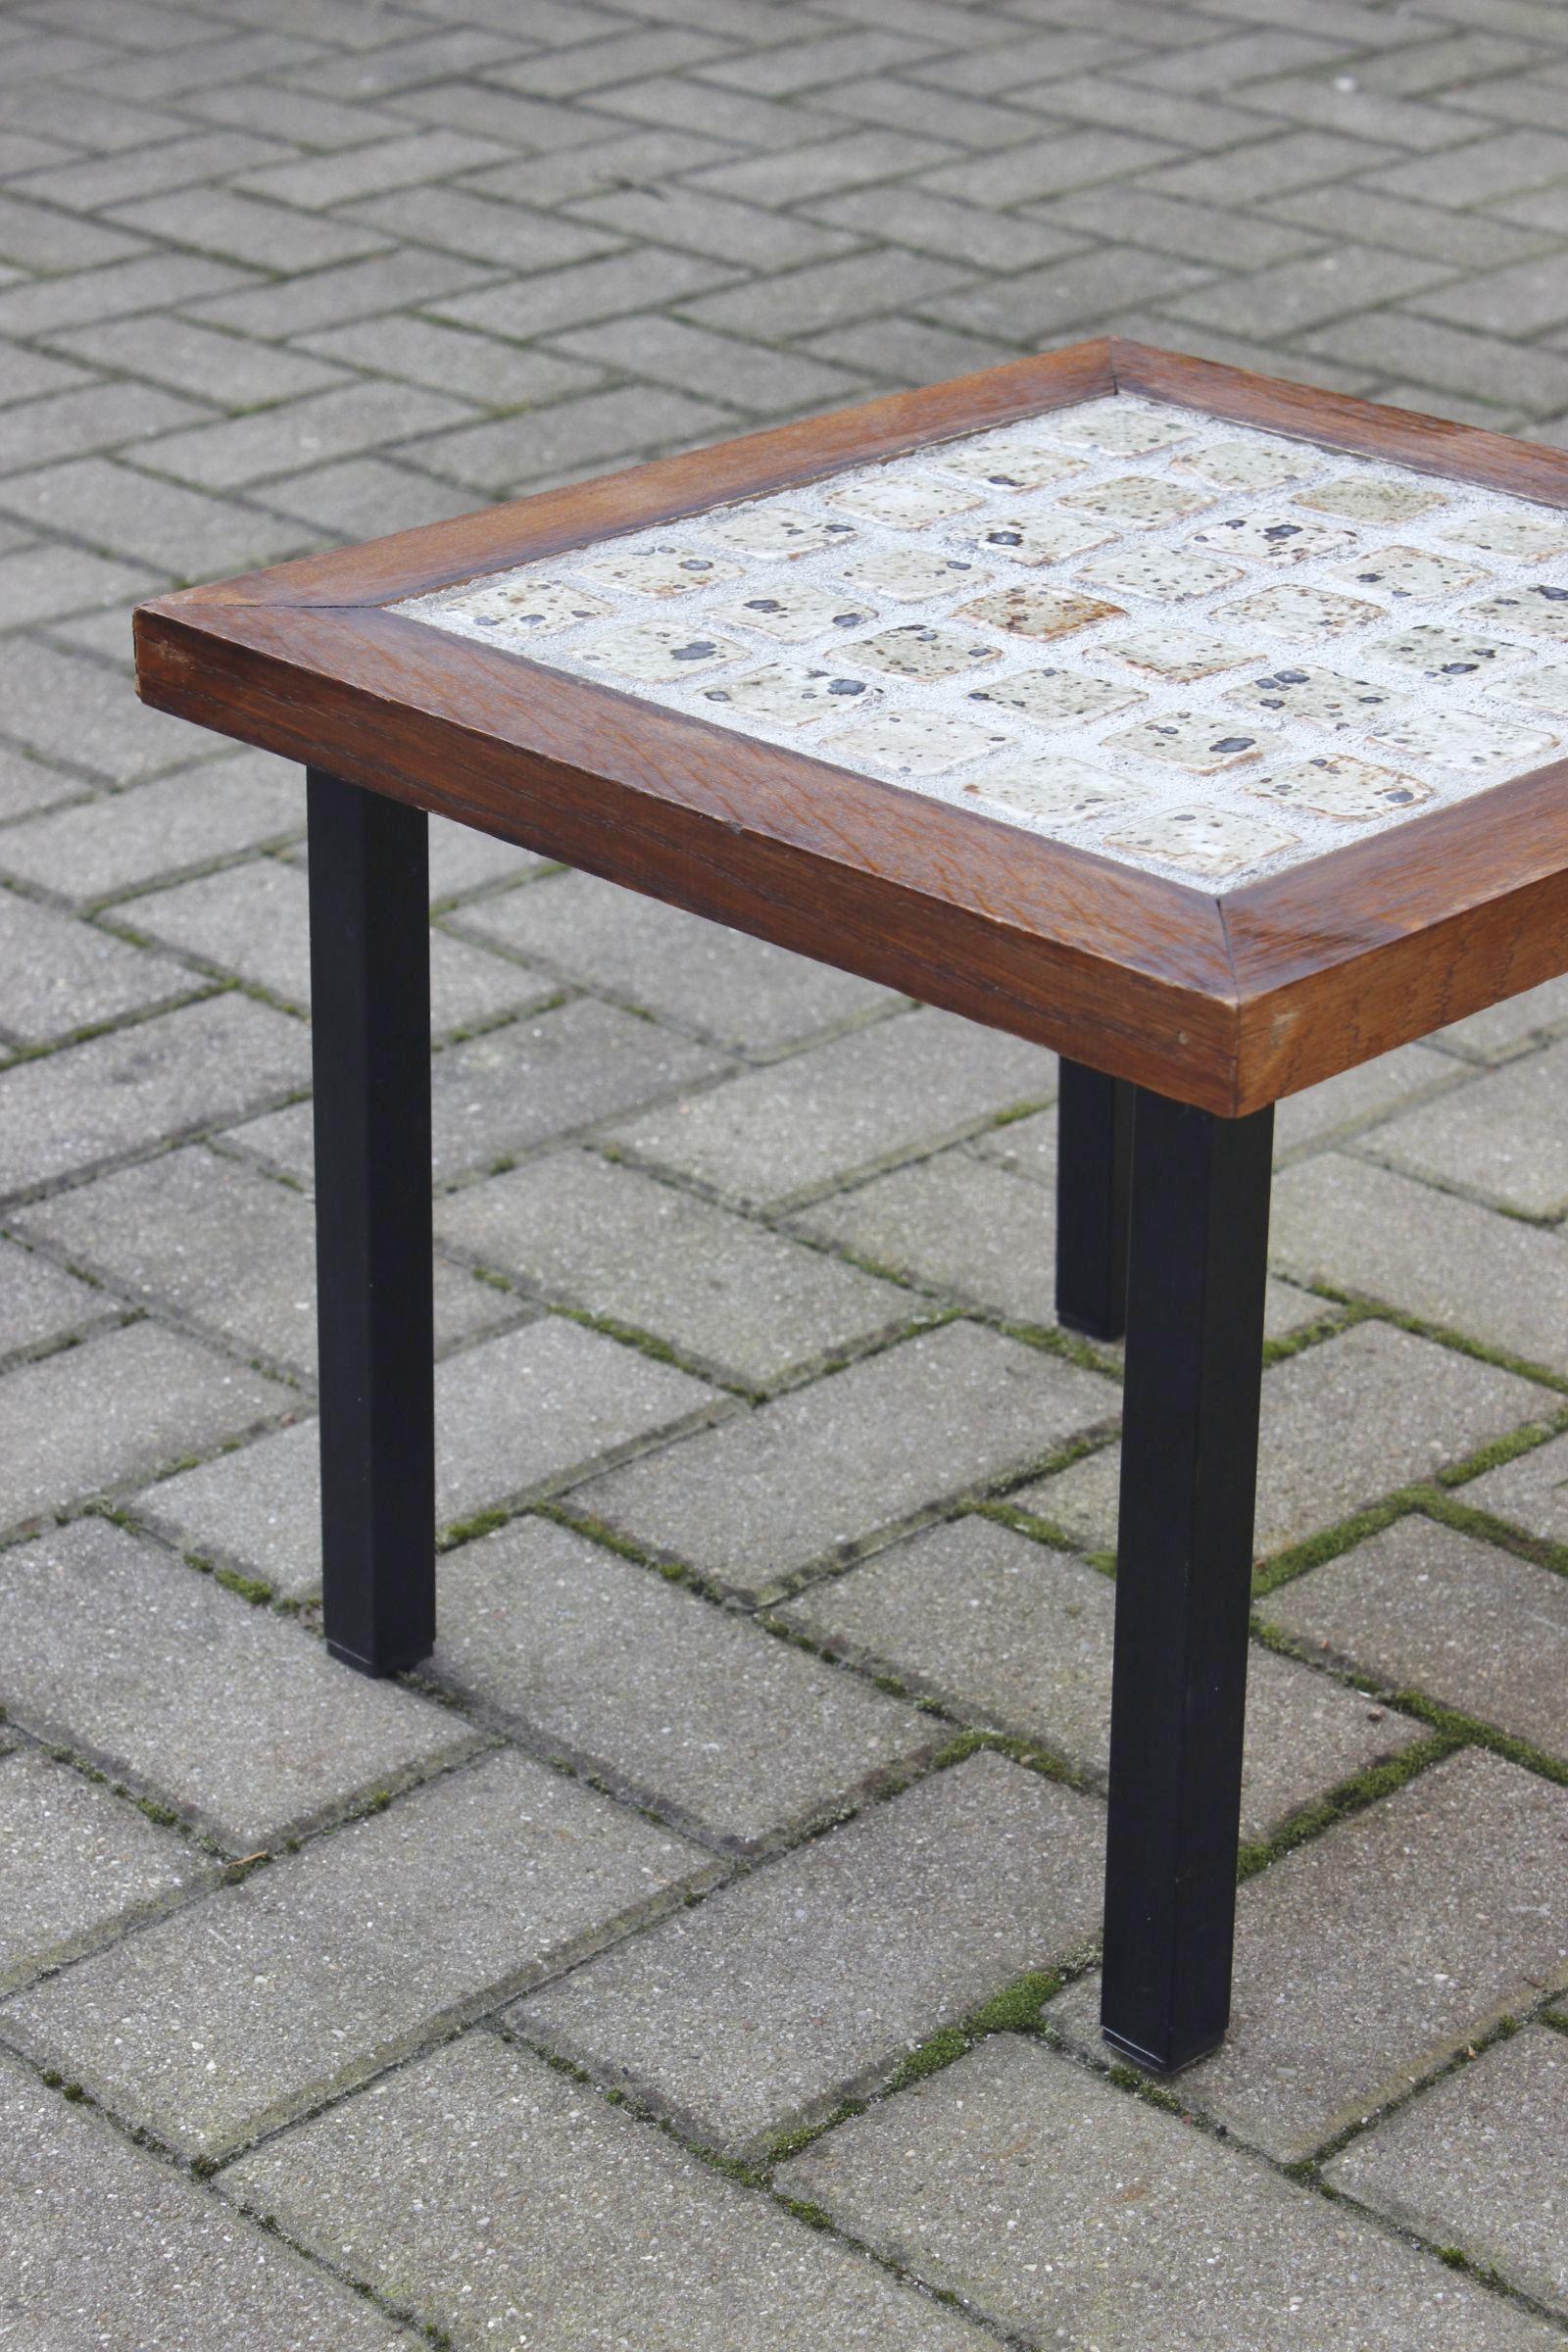 Beautiful side table circa 1950, the top is in concrete and sandstone tiles with pyrite enamel on soft brown tones, in a dark brown solid wood frame, all resting on four black painted steel legs. 

Unidentified modernist style production from